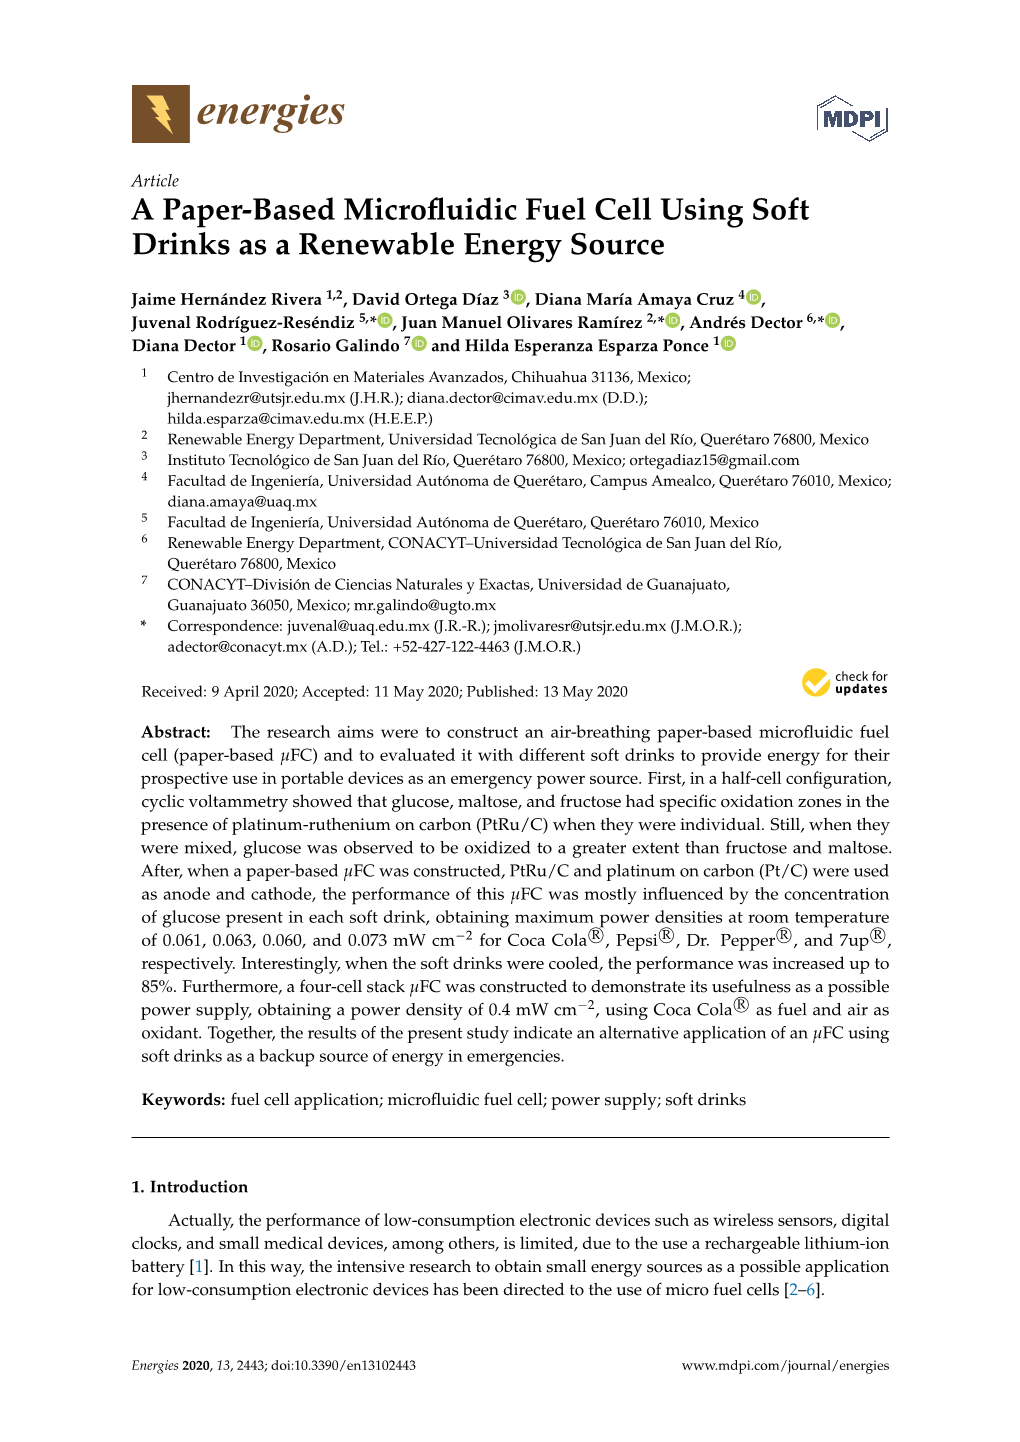 A Paper-Based Microfluidic Fuel Cell Using Soft Drinks As A